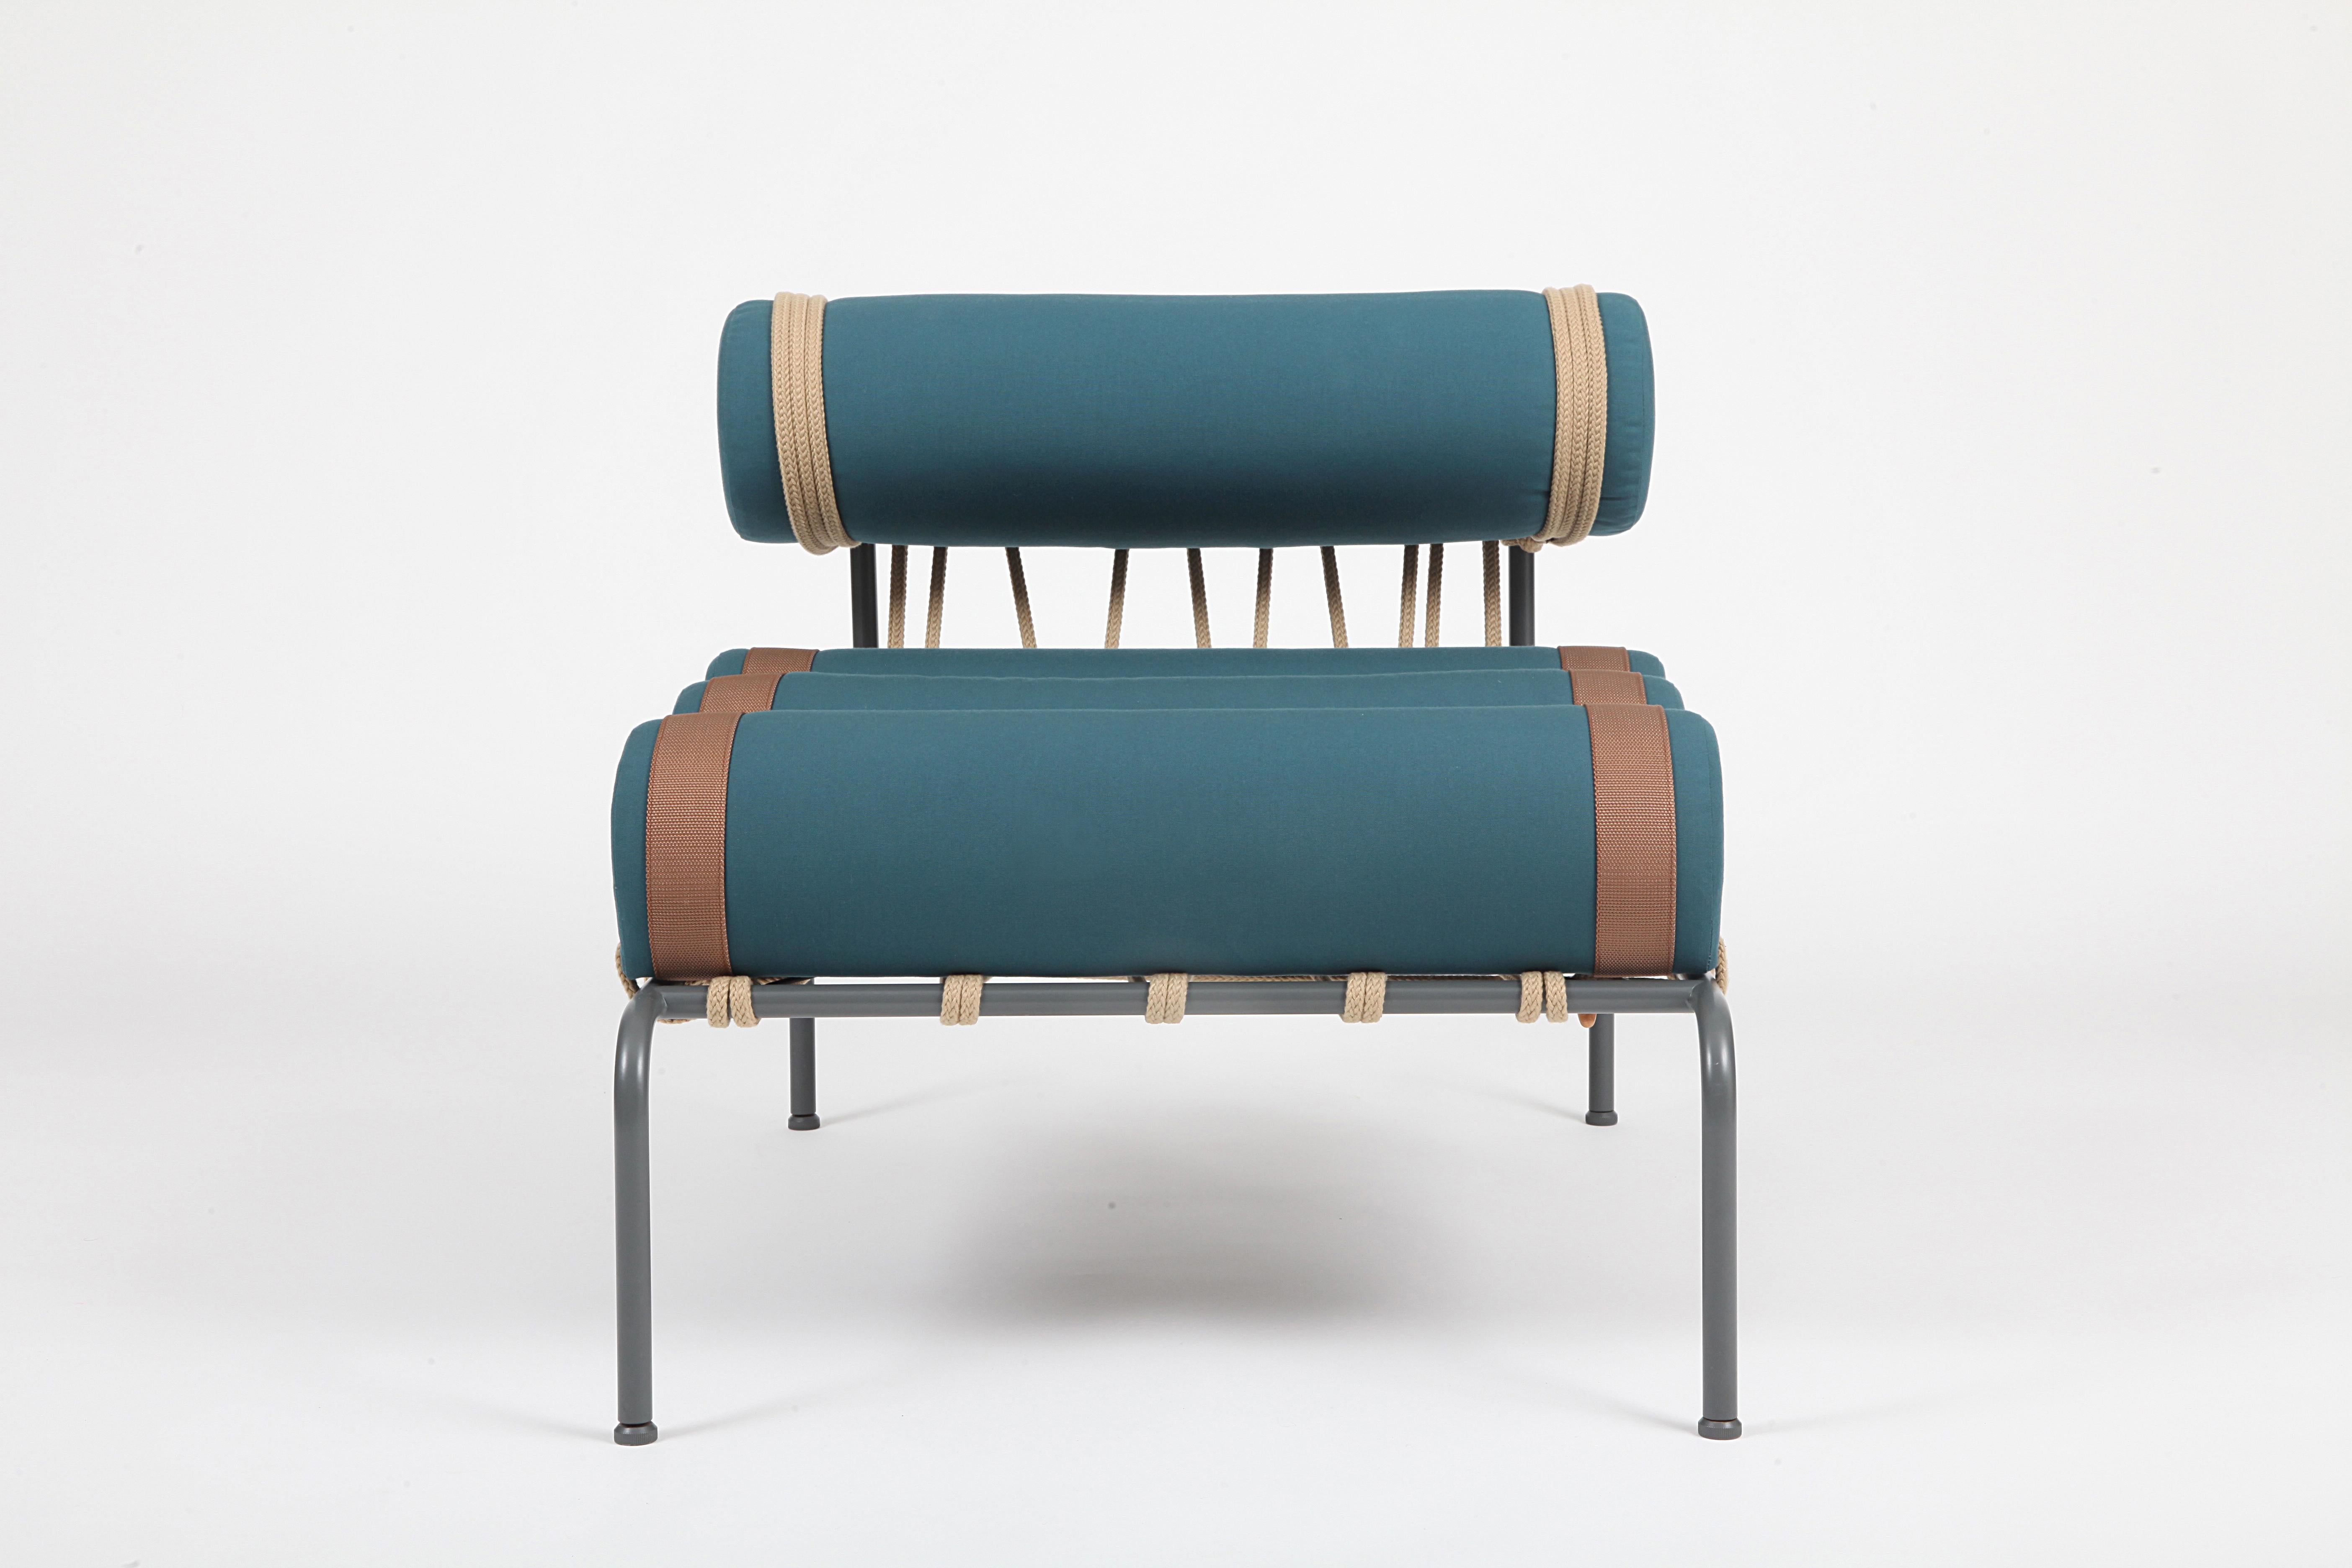 Blu Lago Plain Kylíndo Outdoor Armchair by Dalmoto
Dimensions: D 92 x W 67 x H 69 cm. SH: 40 cm.
Materials: Metal, upholstery and rope.
Finish: RAL 7043 semiopaco metal,  Ecru rope, Blu Lago Plain upholstery and Tabacco bands.

Available in